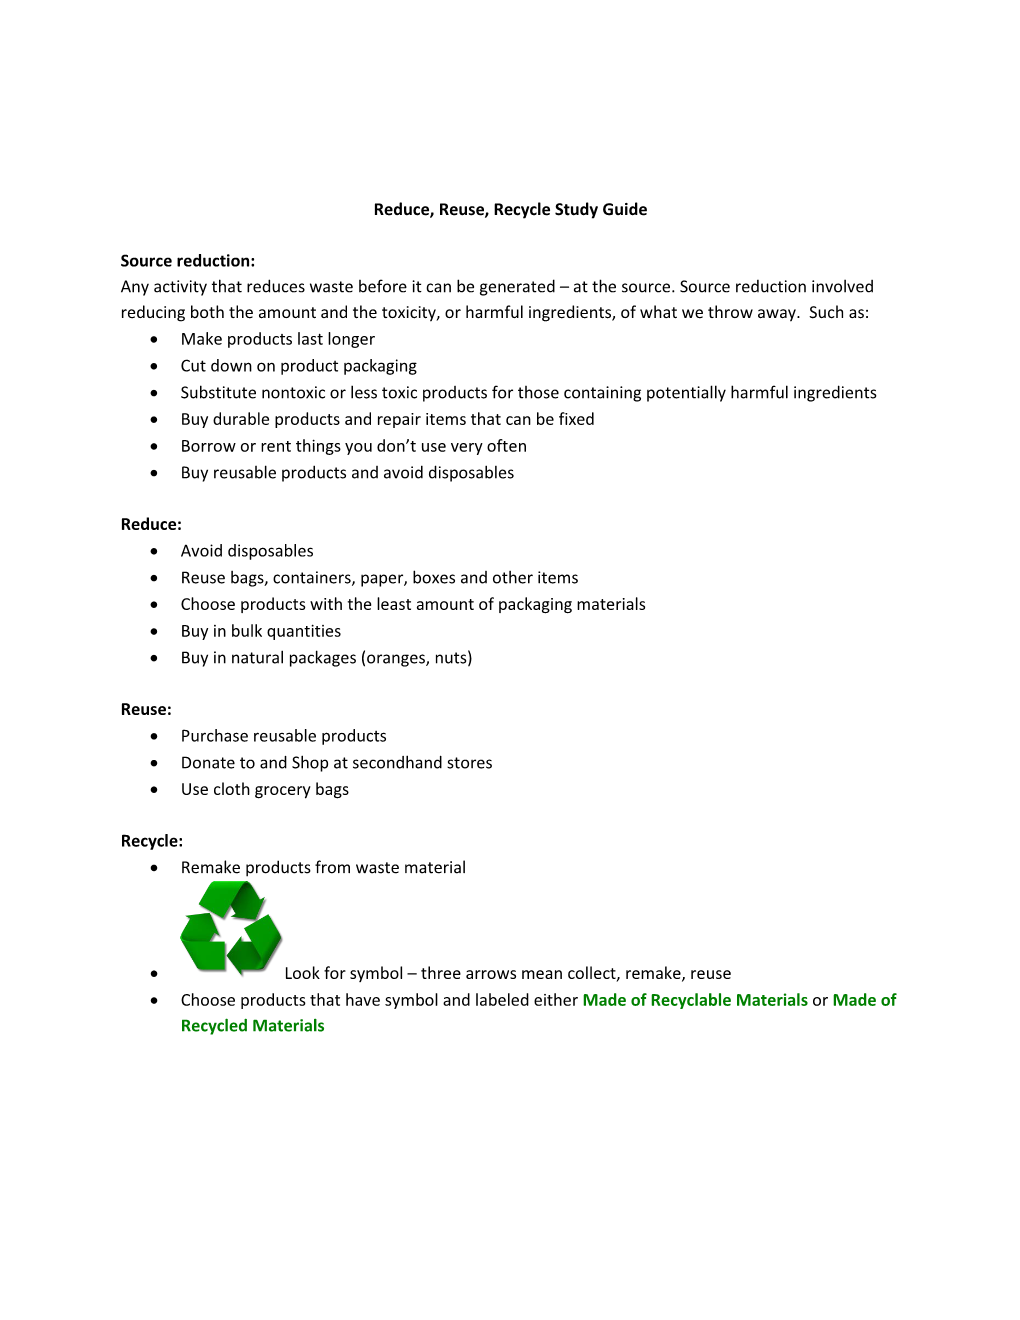 Reduce, Reuse, Recycle Study Guide Source Reduction